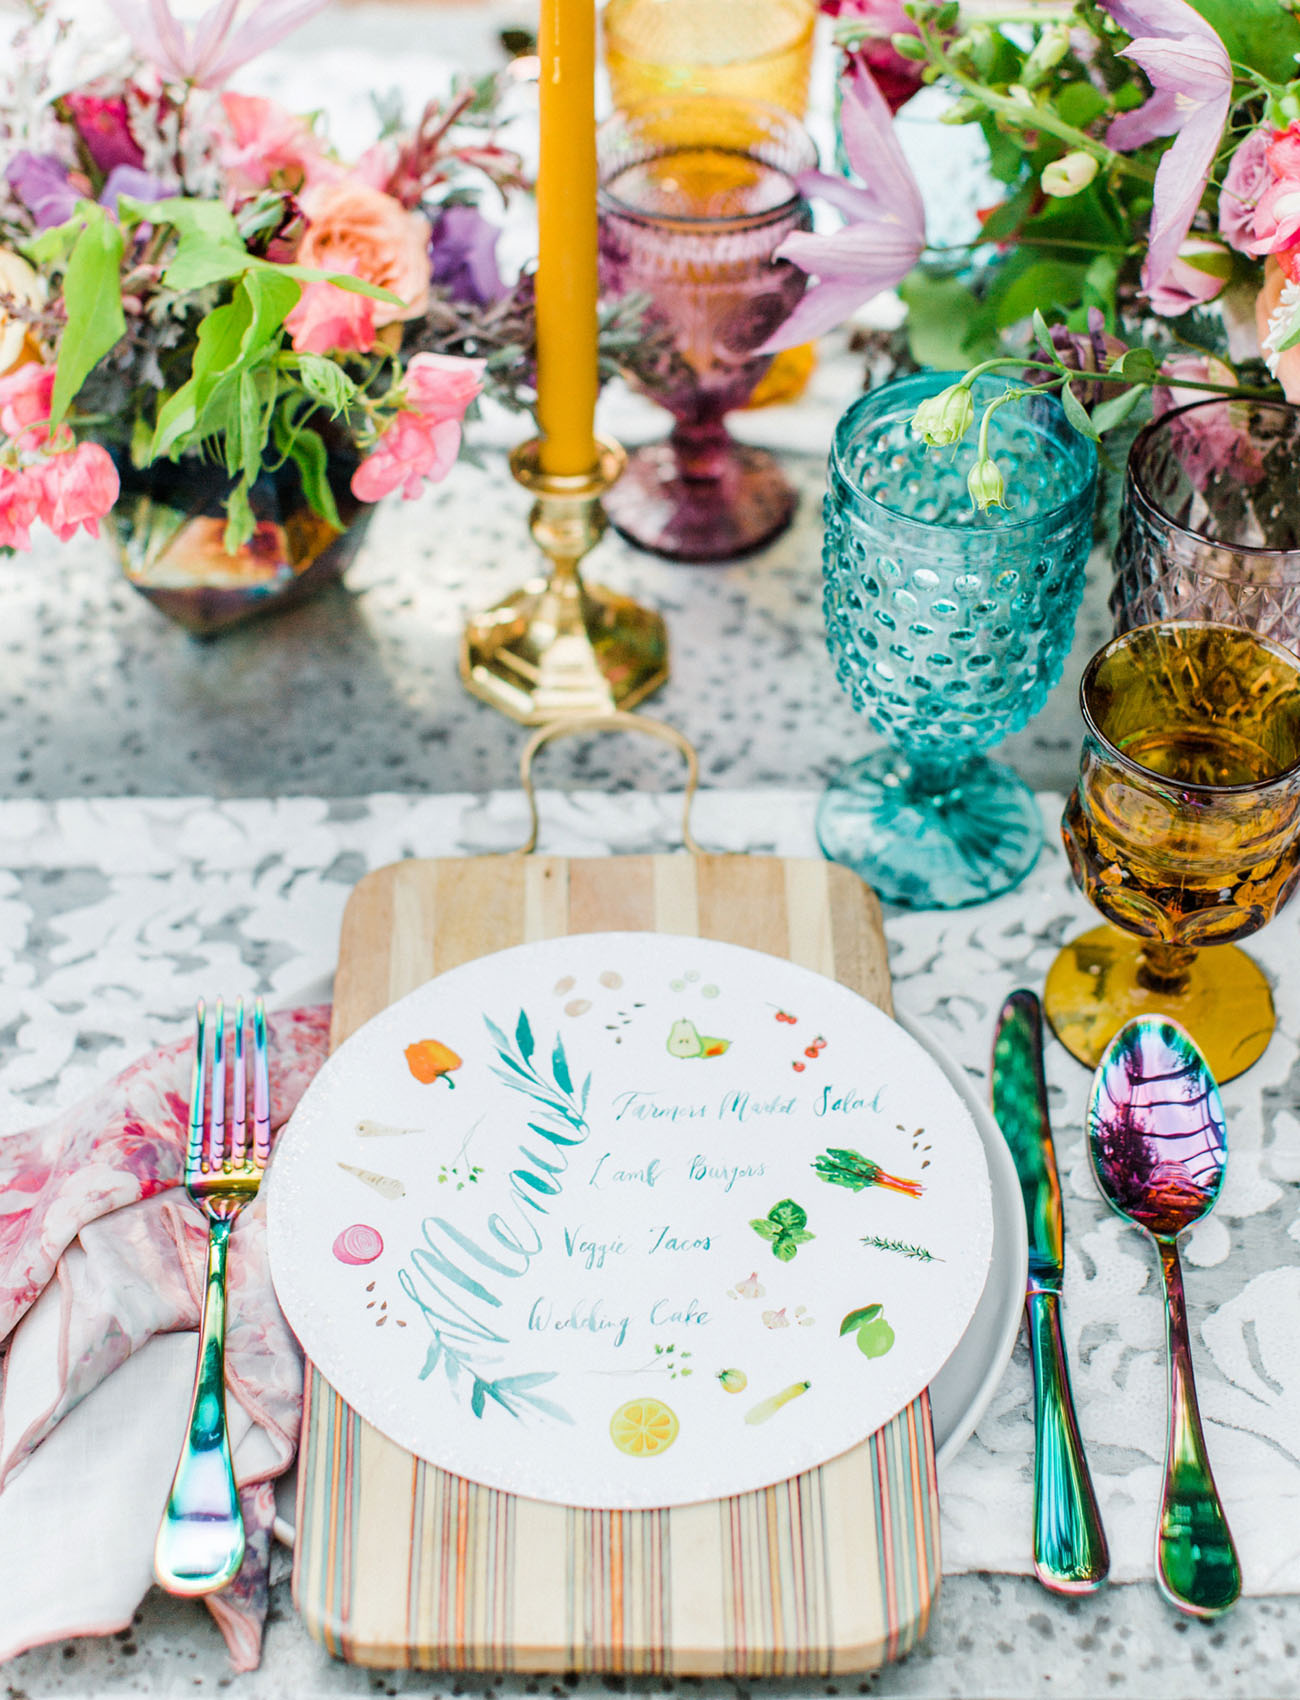 The wedding table setting was done with colorful glasses, bold blooms, printed menus and colorful cutlery